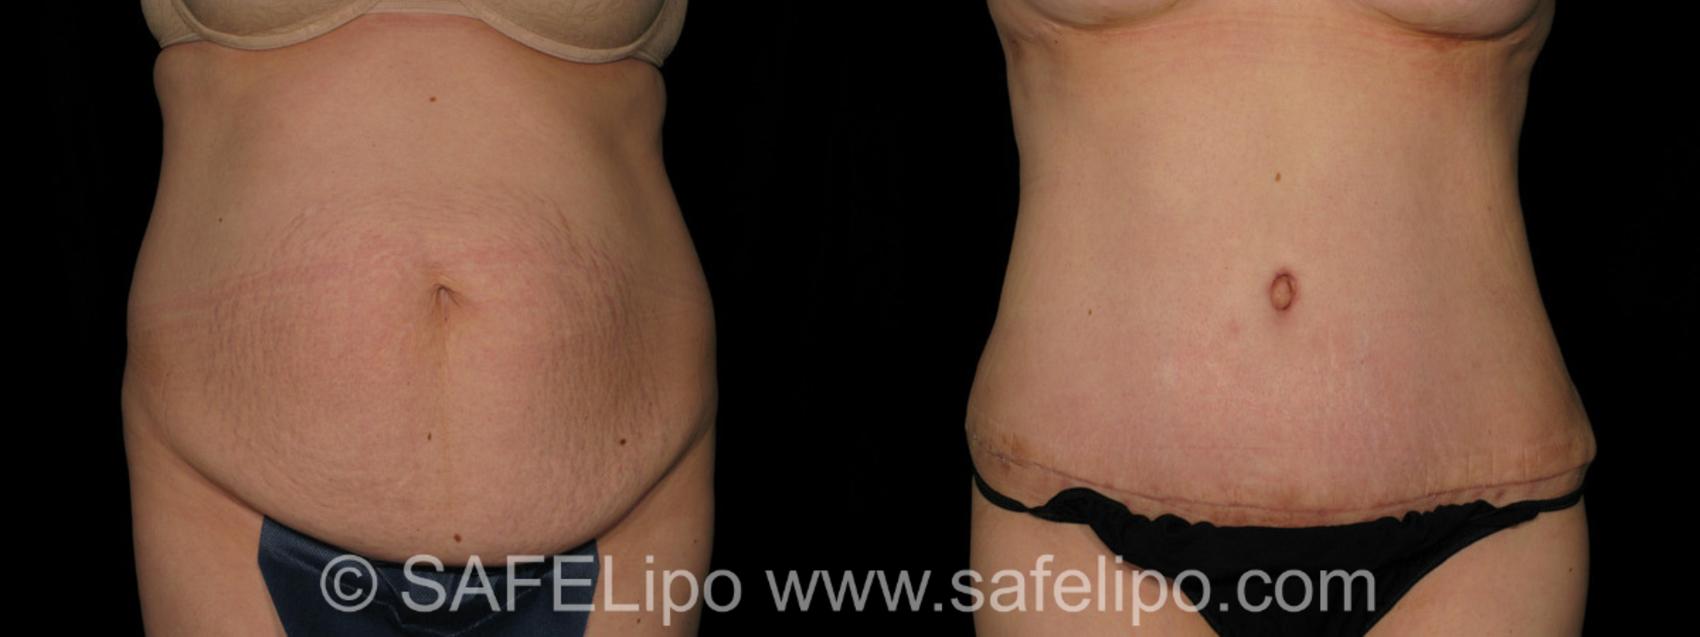 SAFELipo®360 Case 299 Before & After View #1 | SAFELipo®